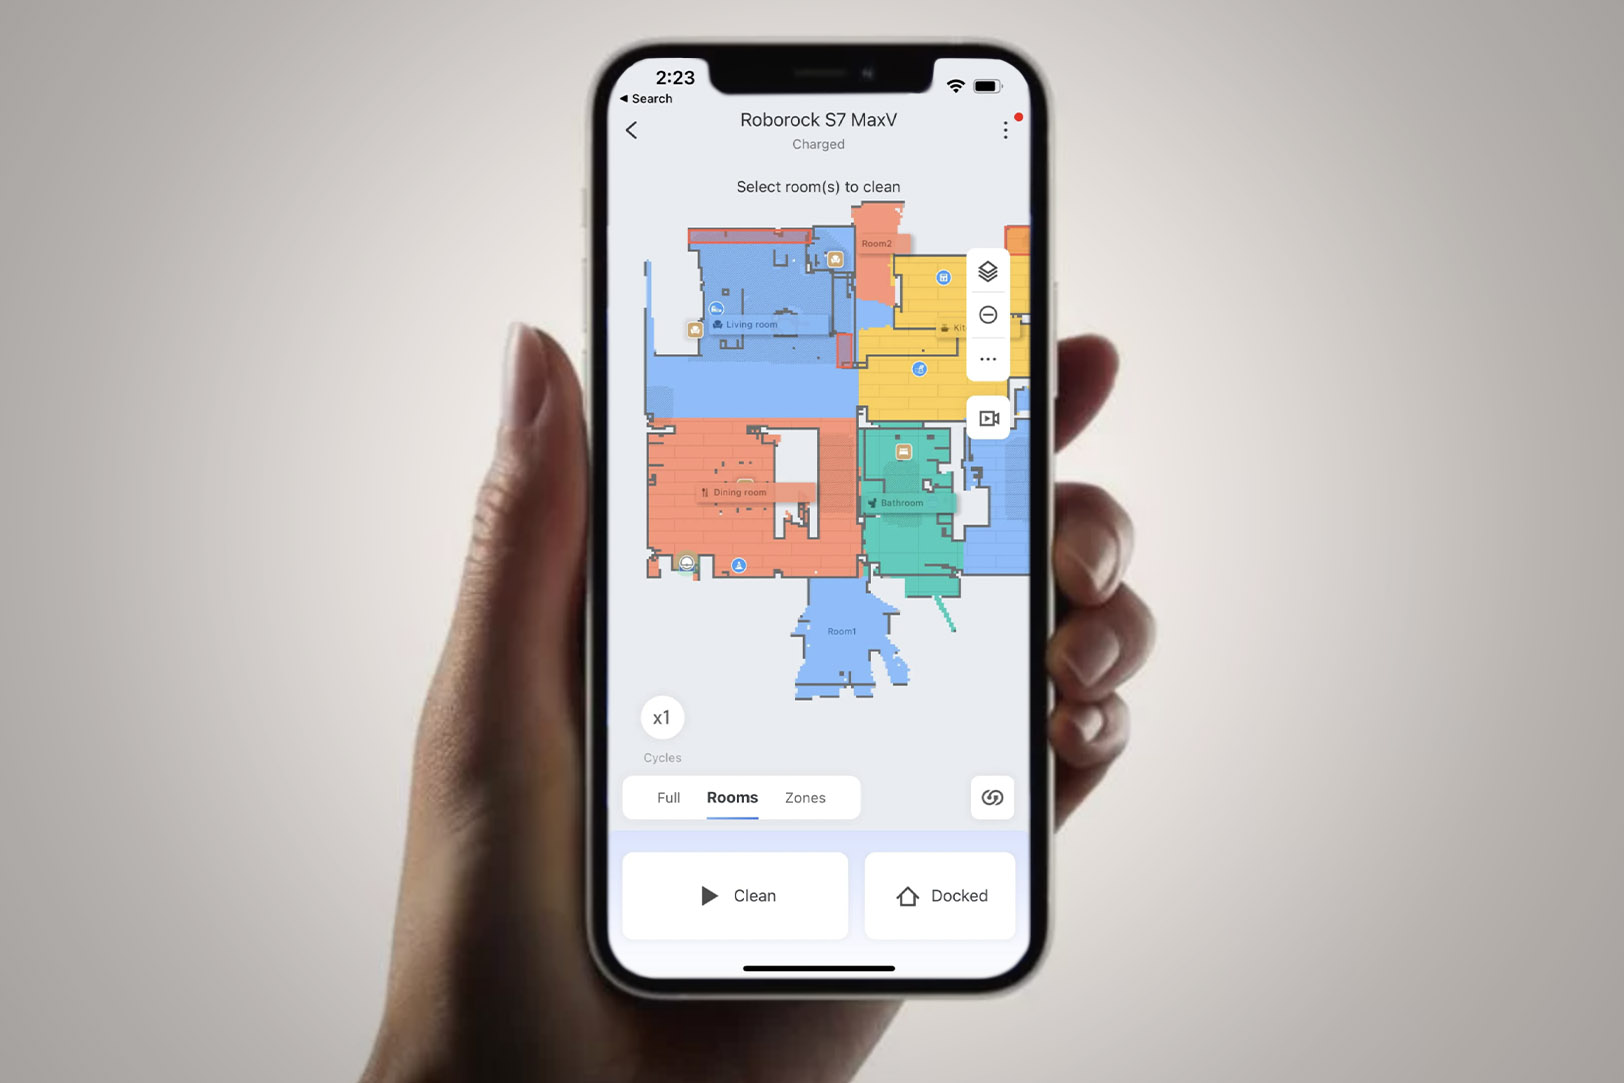 The Roborock S7 app shows each room in your house and allows you to set 